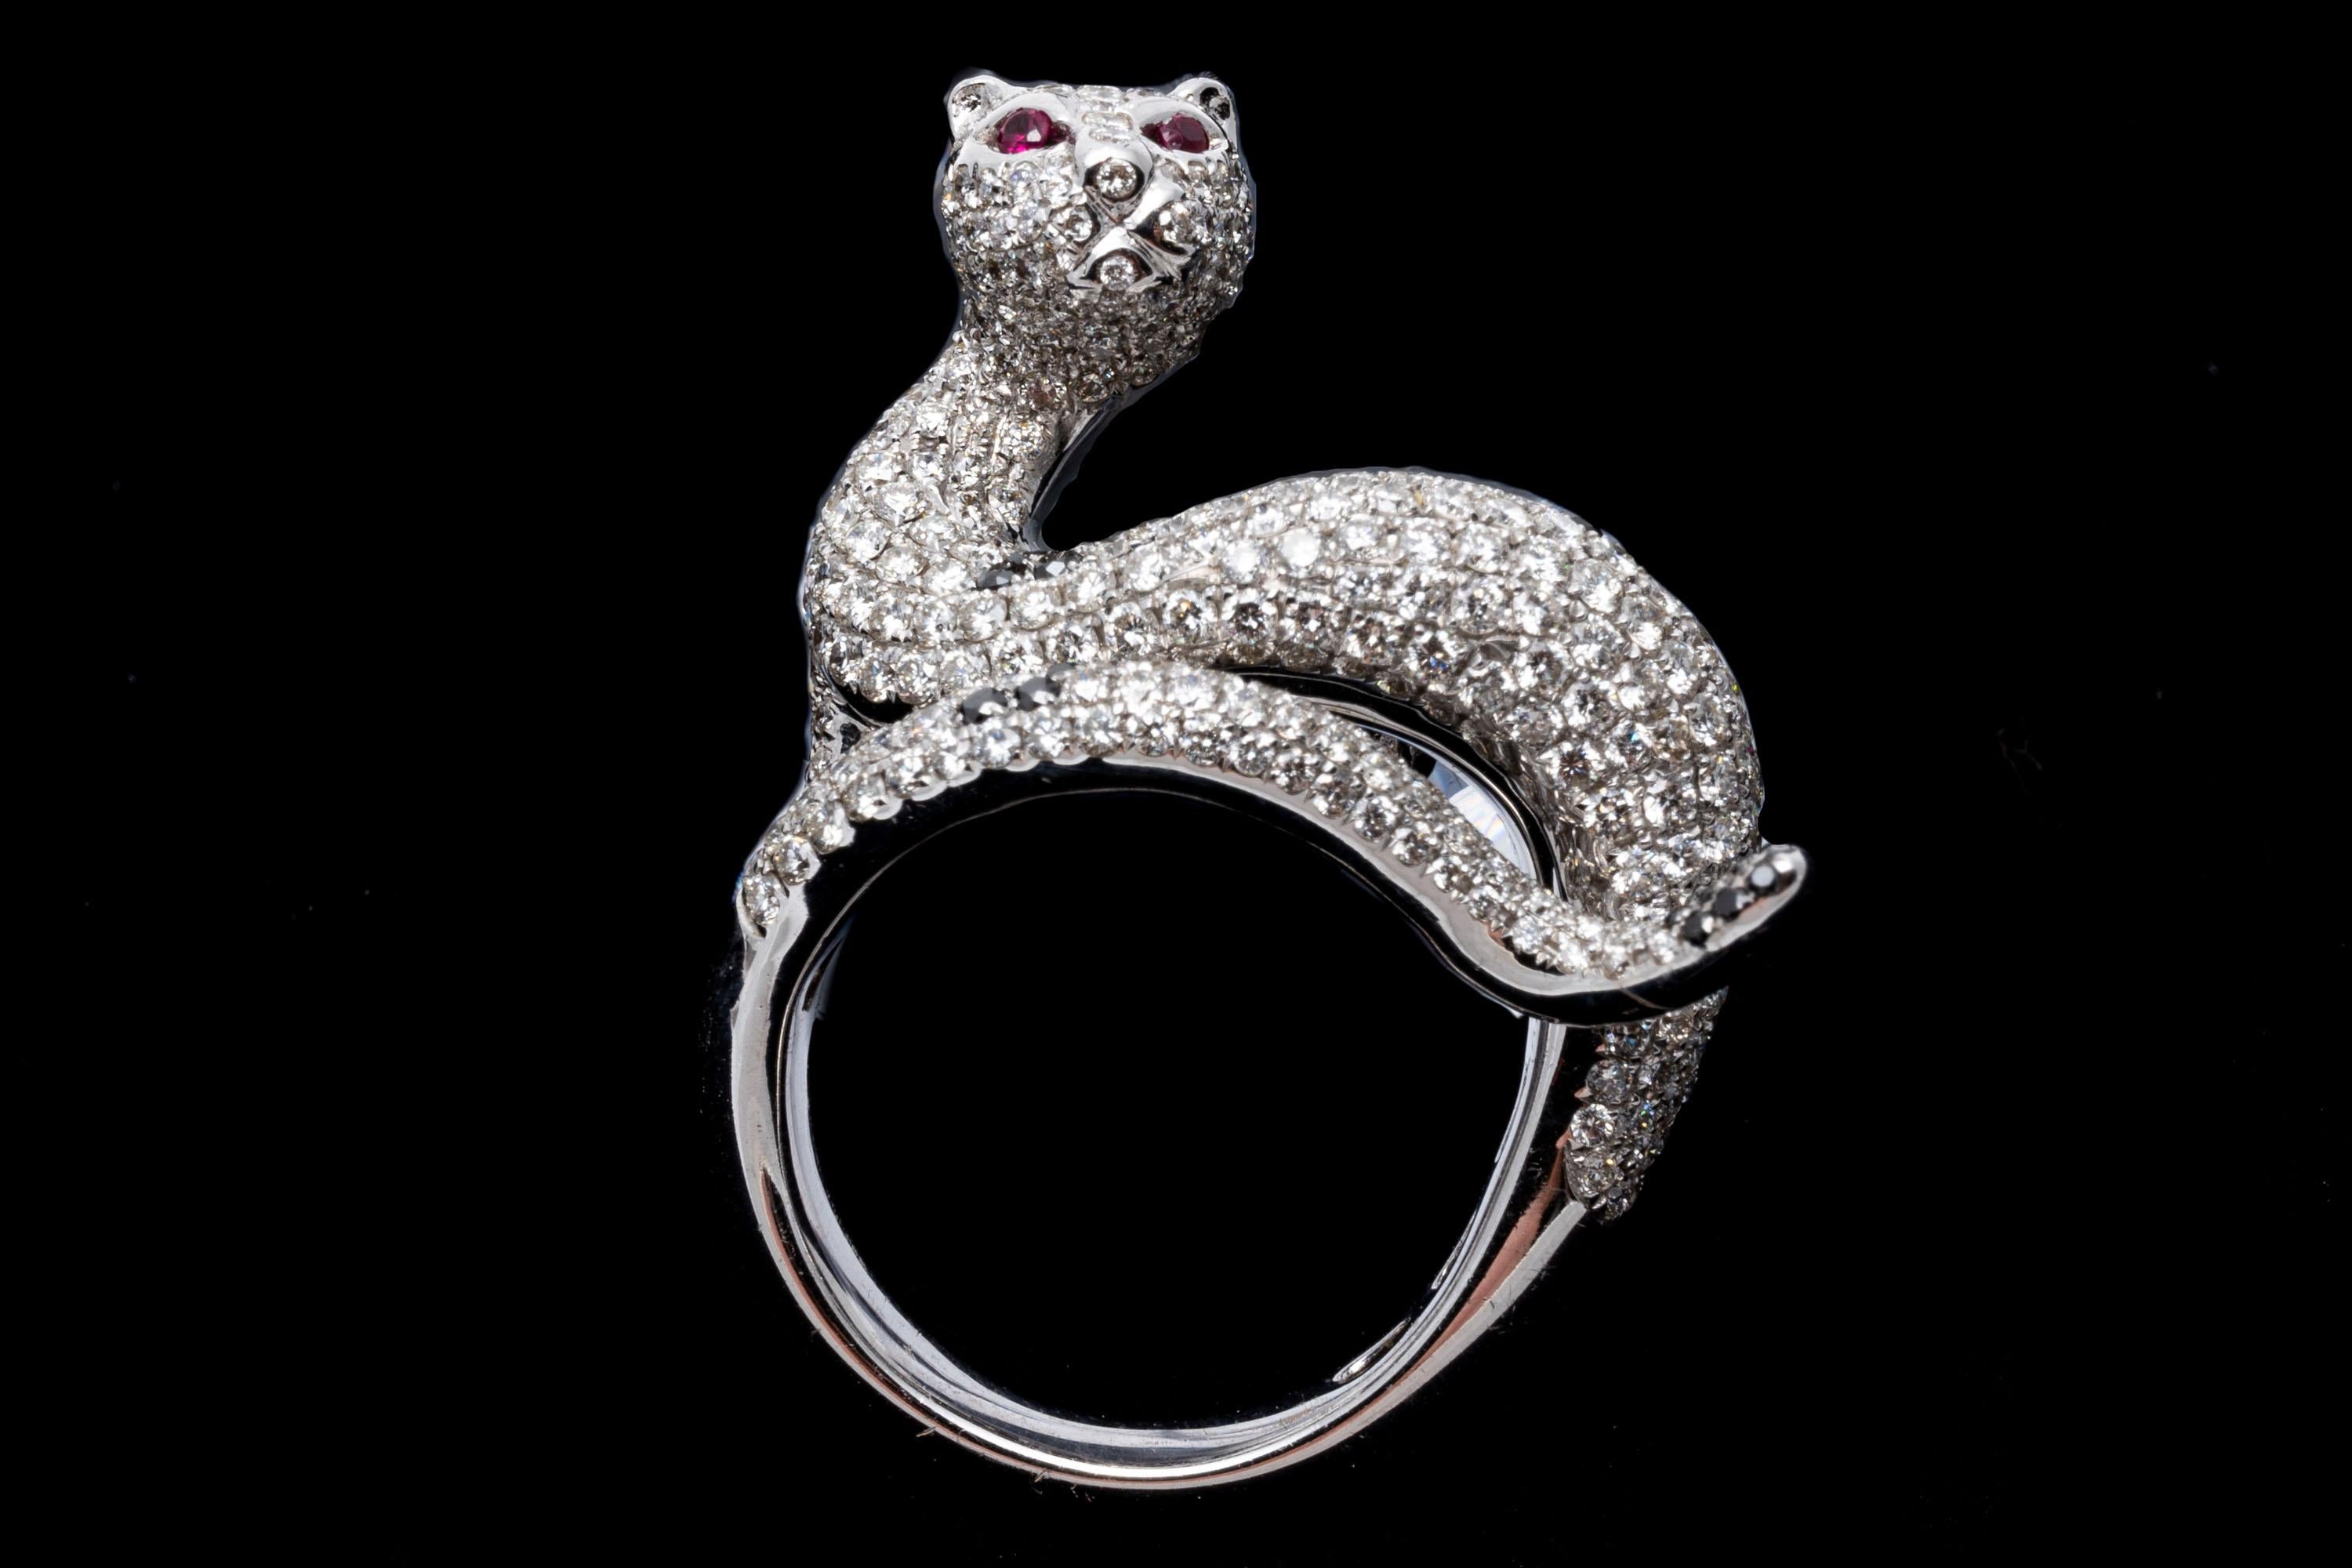 18k white gold ring. This stunning, elegant ring is a white gold, figural cat motif, with a slinky body and elongated tail bypass, pave set with round faceted white diamonds, approximately 1.54 TCW and decorated with black faceted diamonds spots,